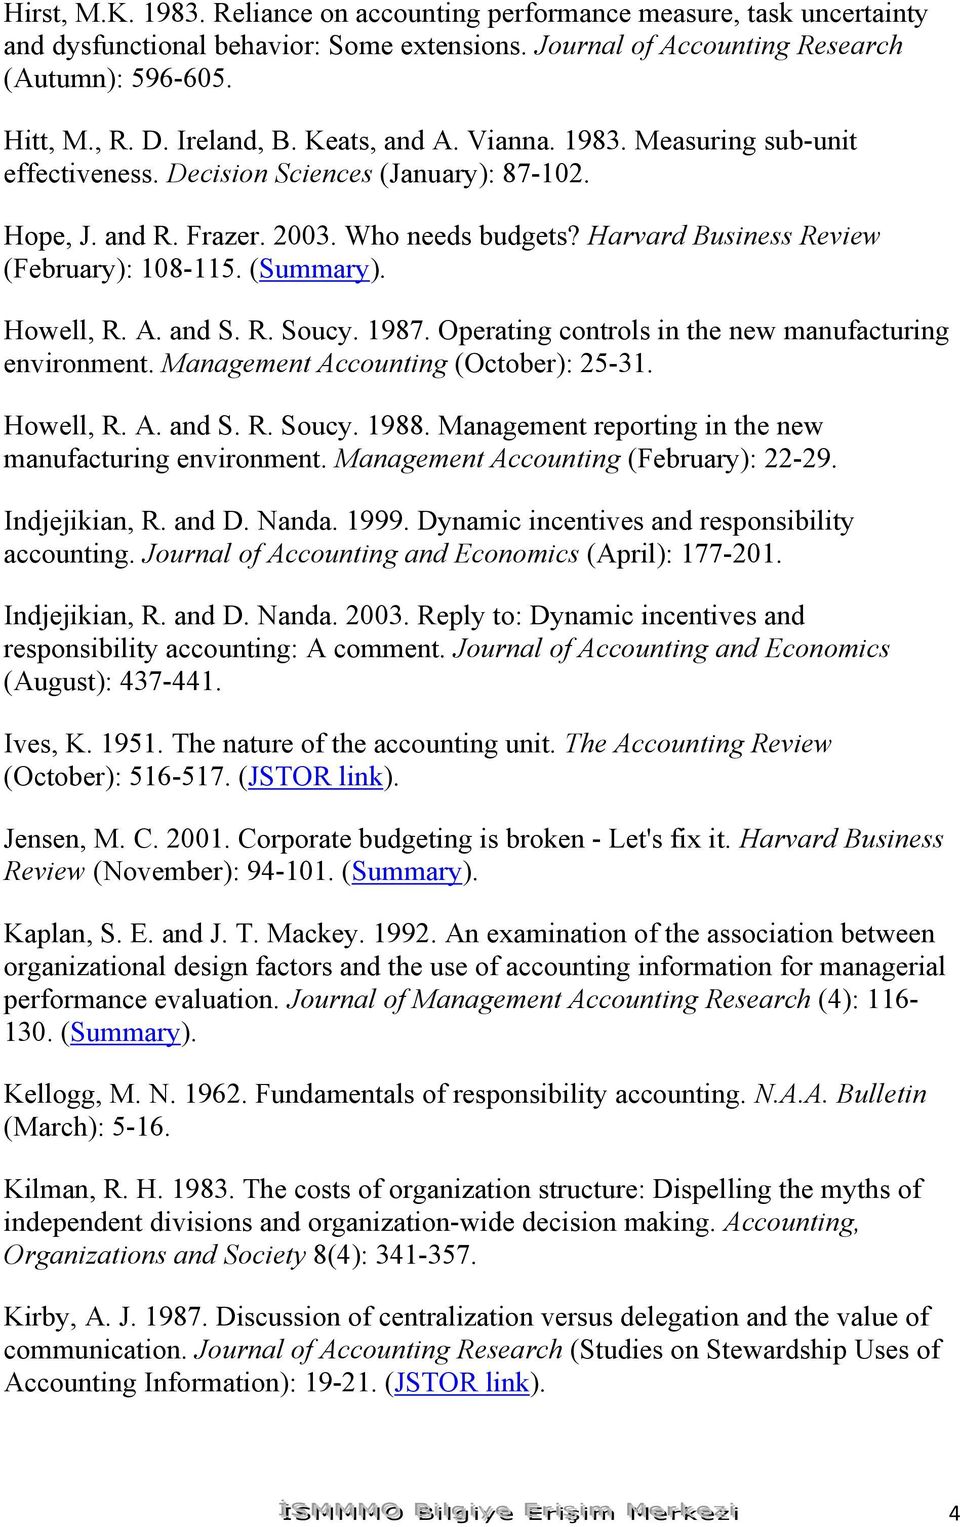 Harvard Business Review (February): 108-115. (Summary). Howell, R. A. and S. R. Soucy. 1987. Operating controls in the new manufacturing environment. Management Accounting (October): 25-31. Howell, R. A. and S. R. Soucy. 1988.